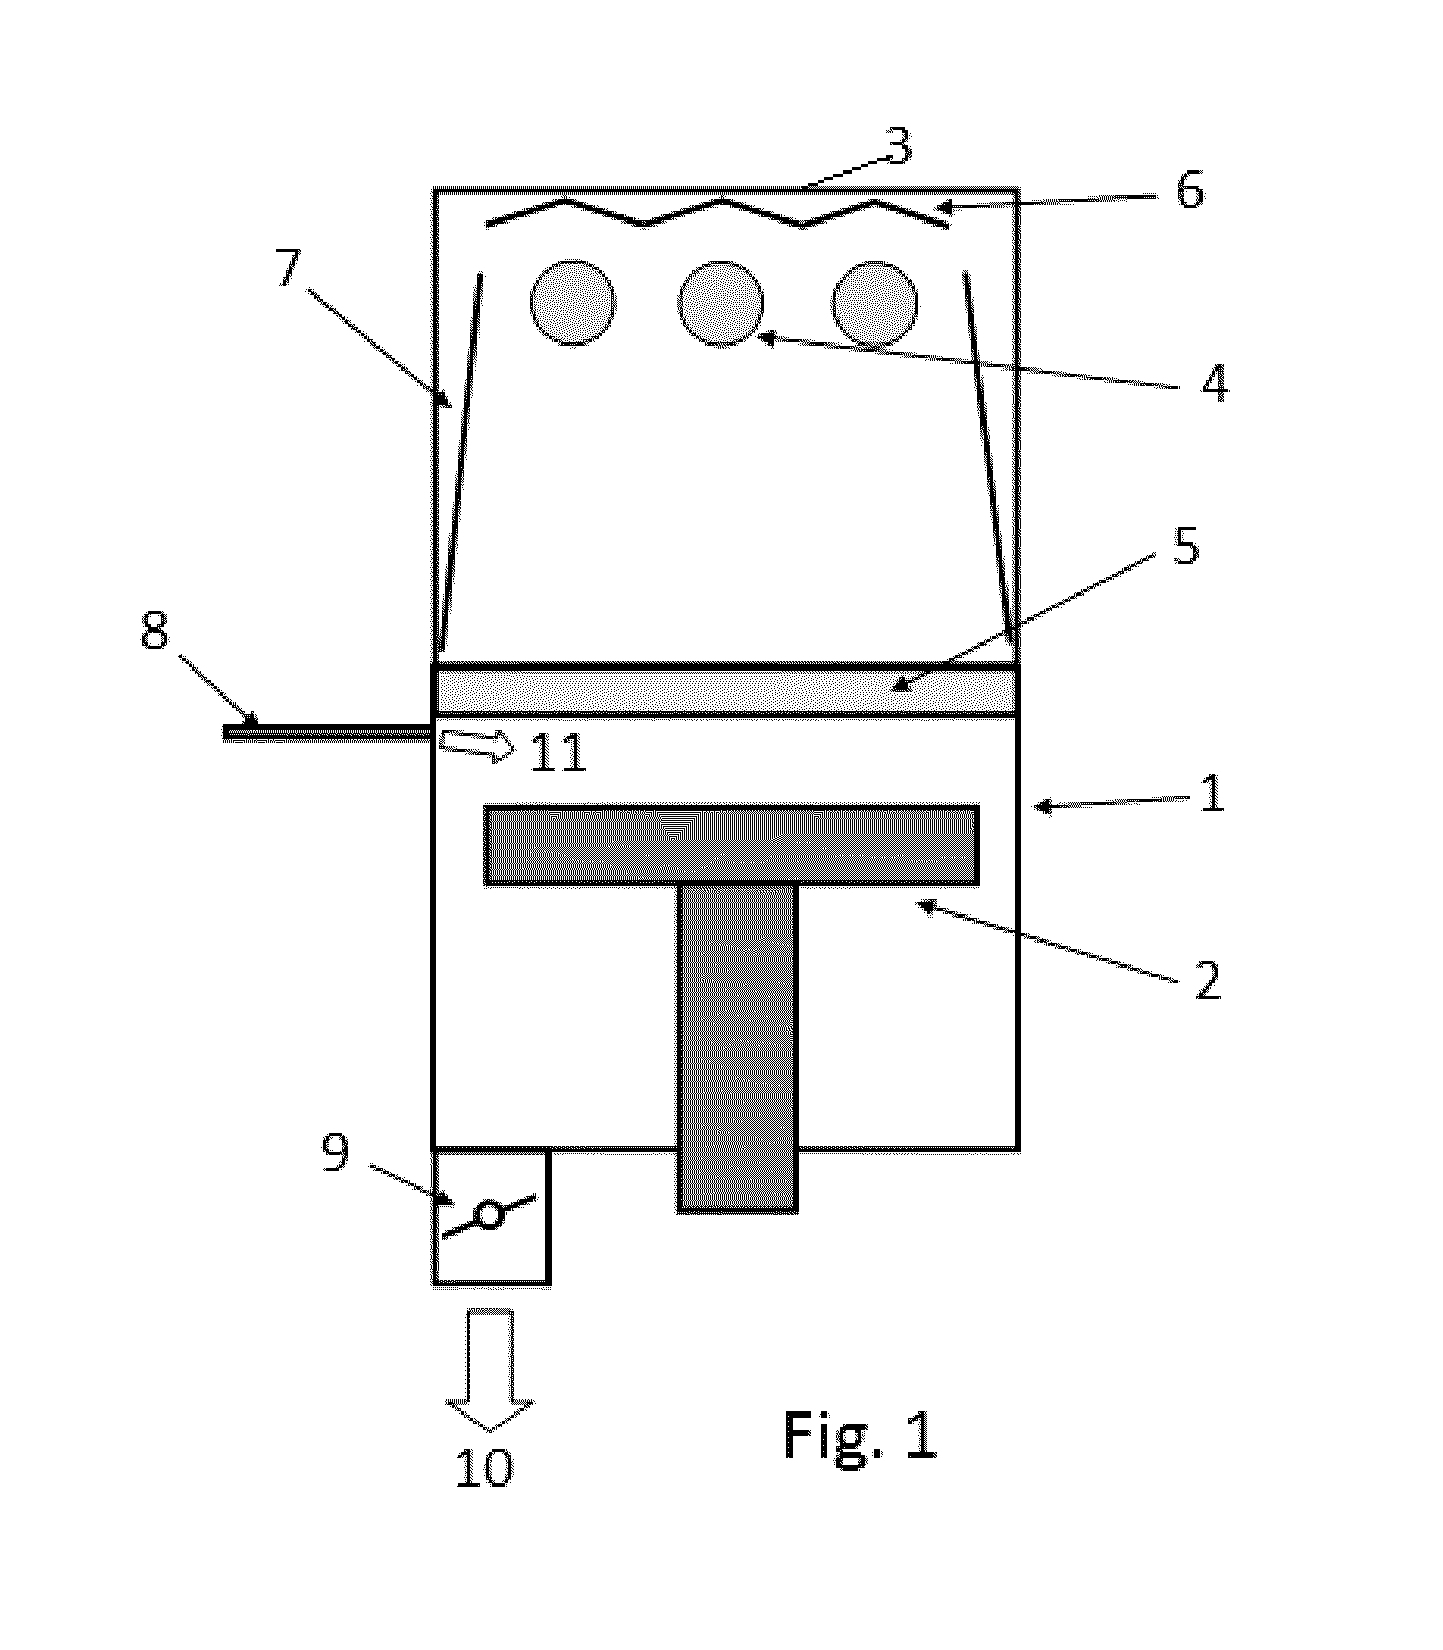 Method for Sealing Pores at Surface of Dielectric Layer by UV Light-Assisted CVD